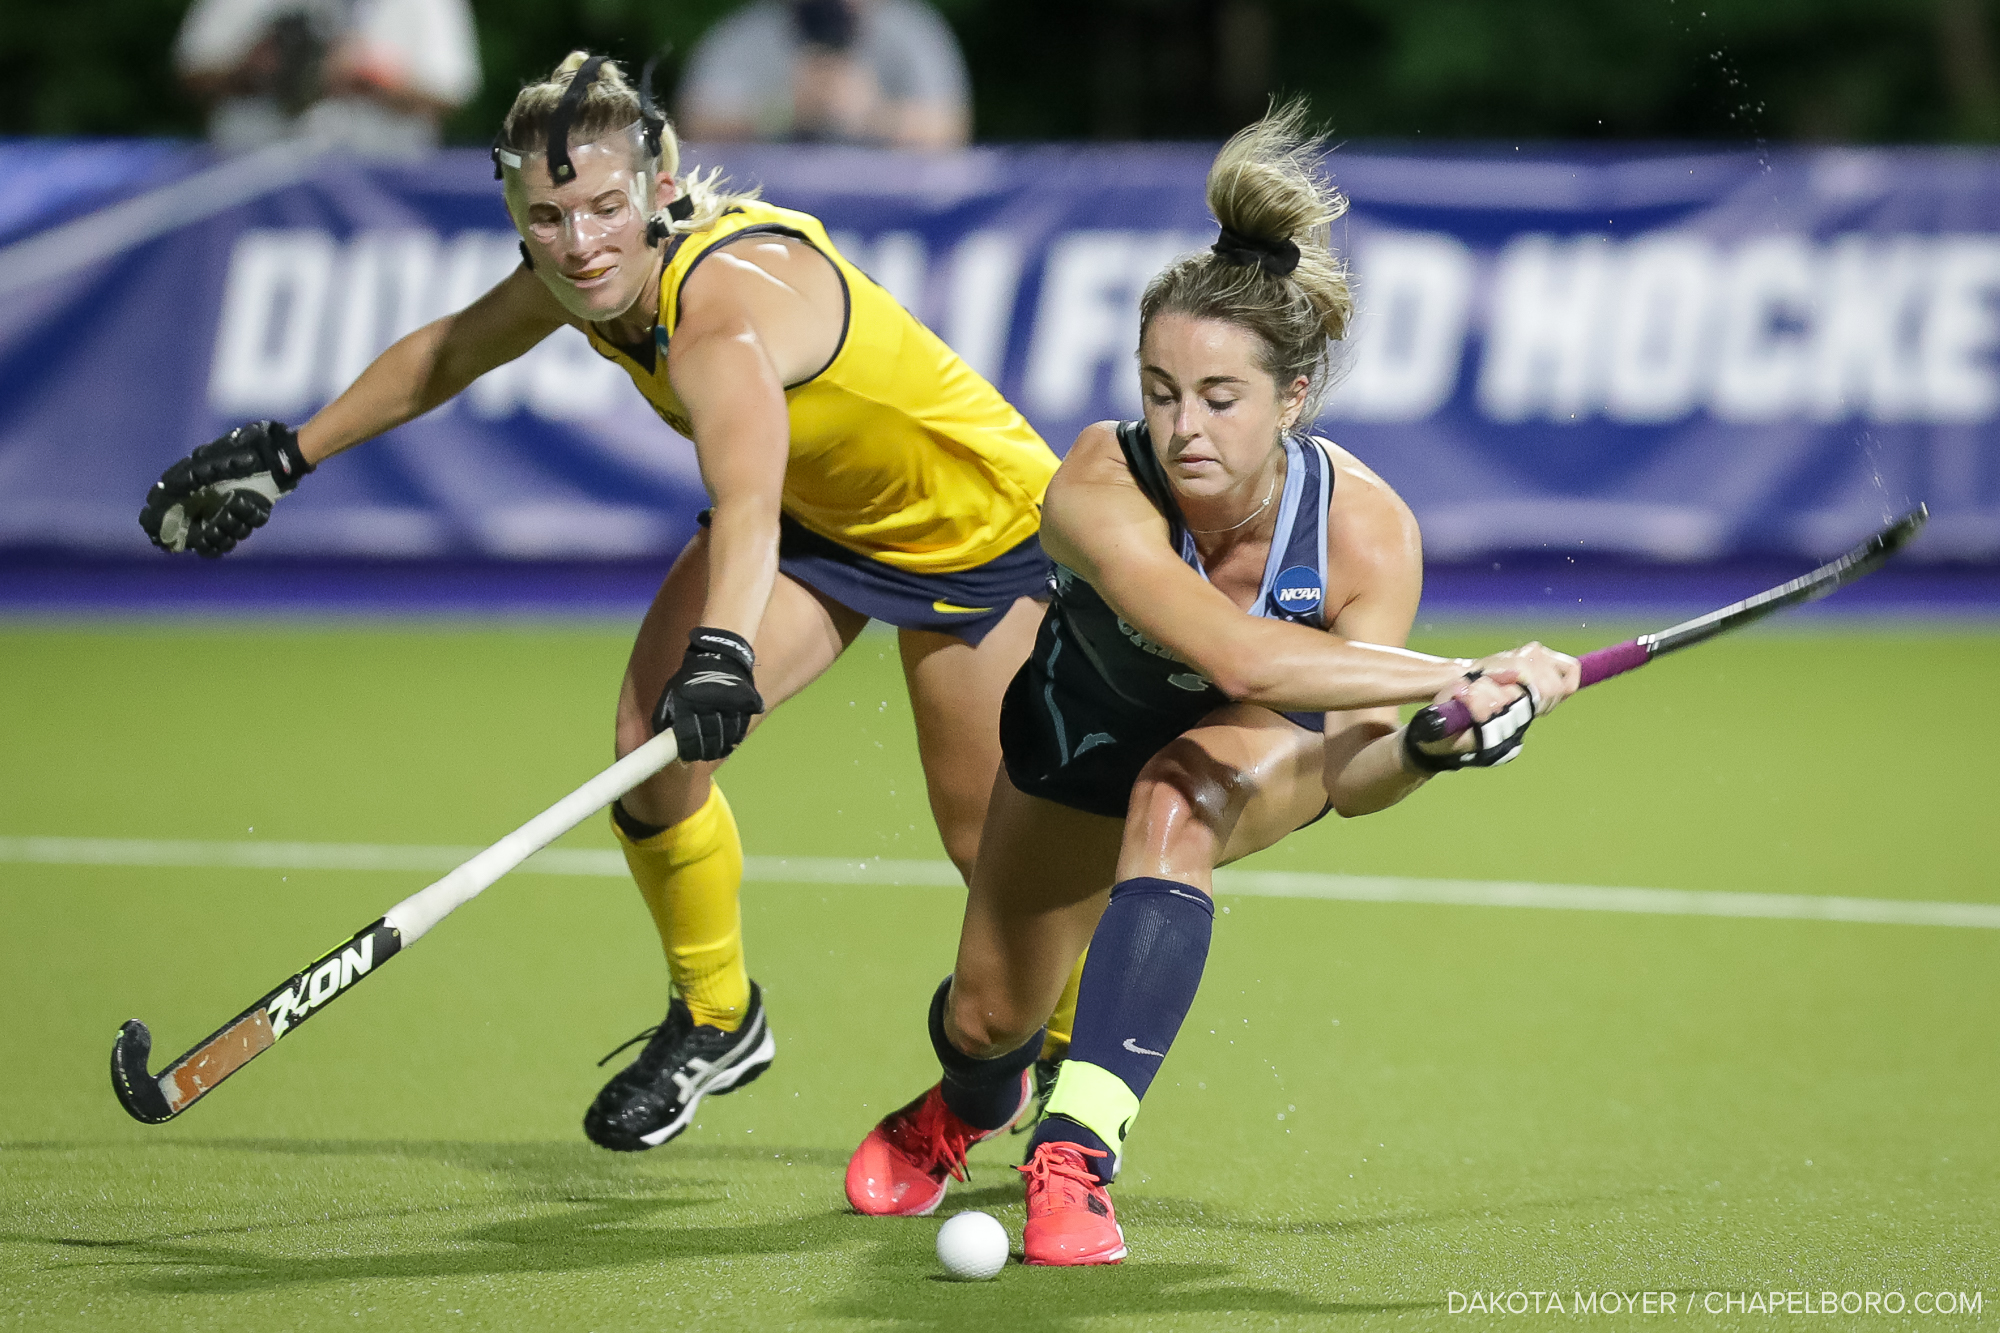 Six Current and Former UNC Players Named to U.S. National Field Hockey